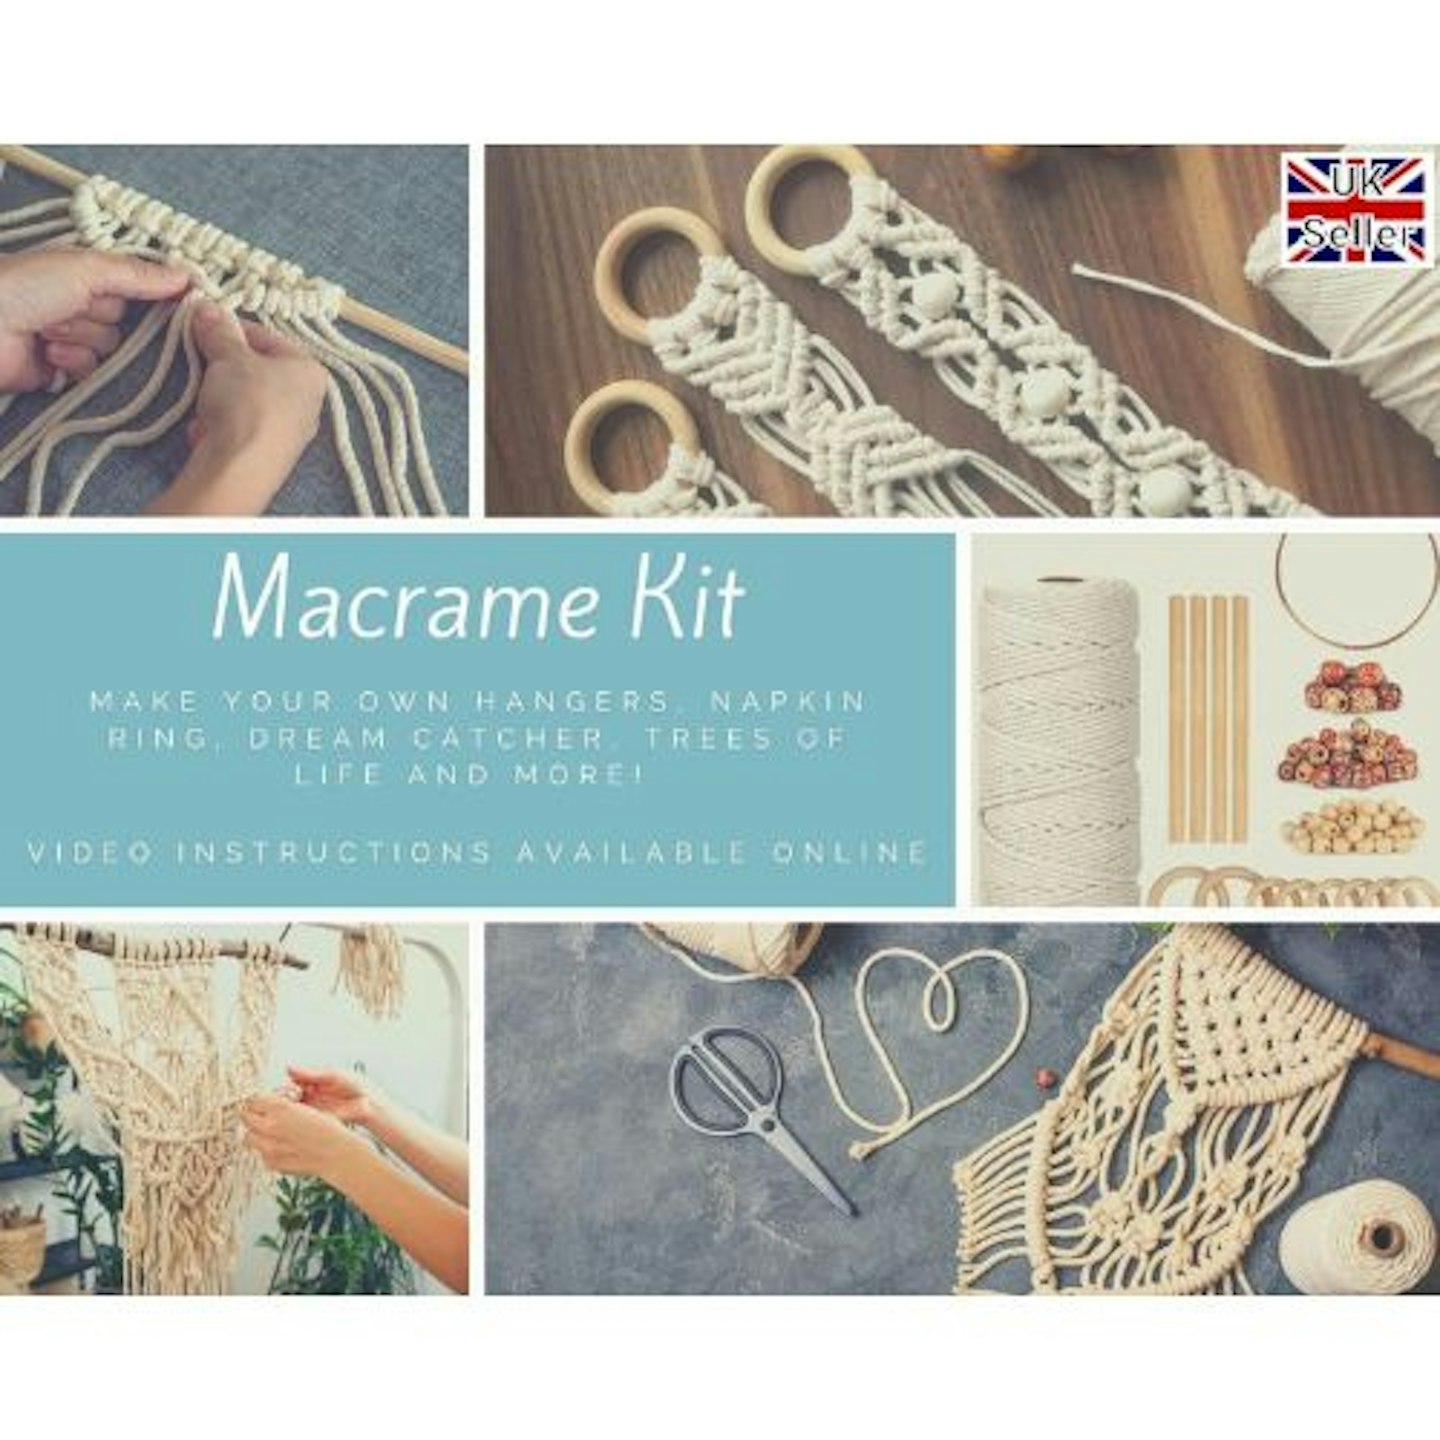 EASY Macrame Beginners Kit for Wall Hanging, Plant Hanger DIY KIT for  Adults Beginners W/ Paper Instruction & Video Tutorial, Christmas Gift 